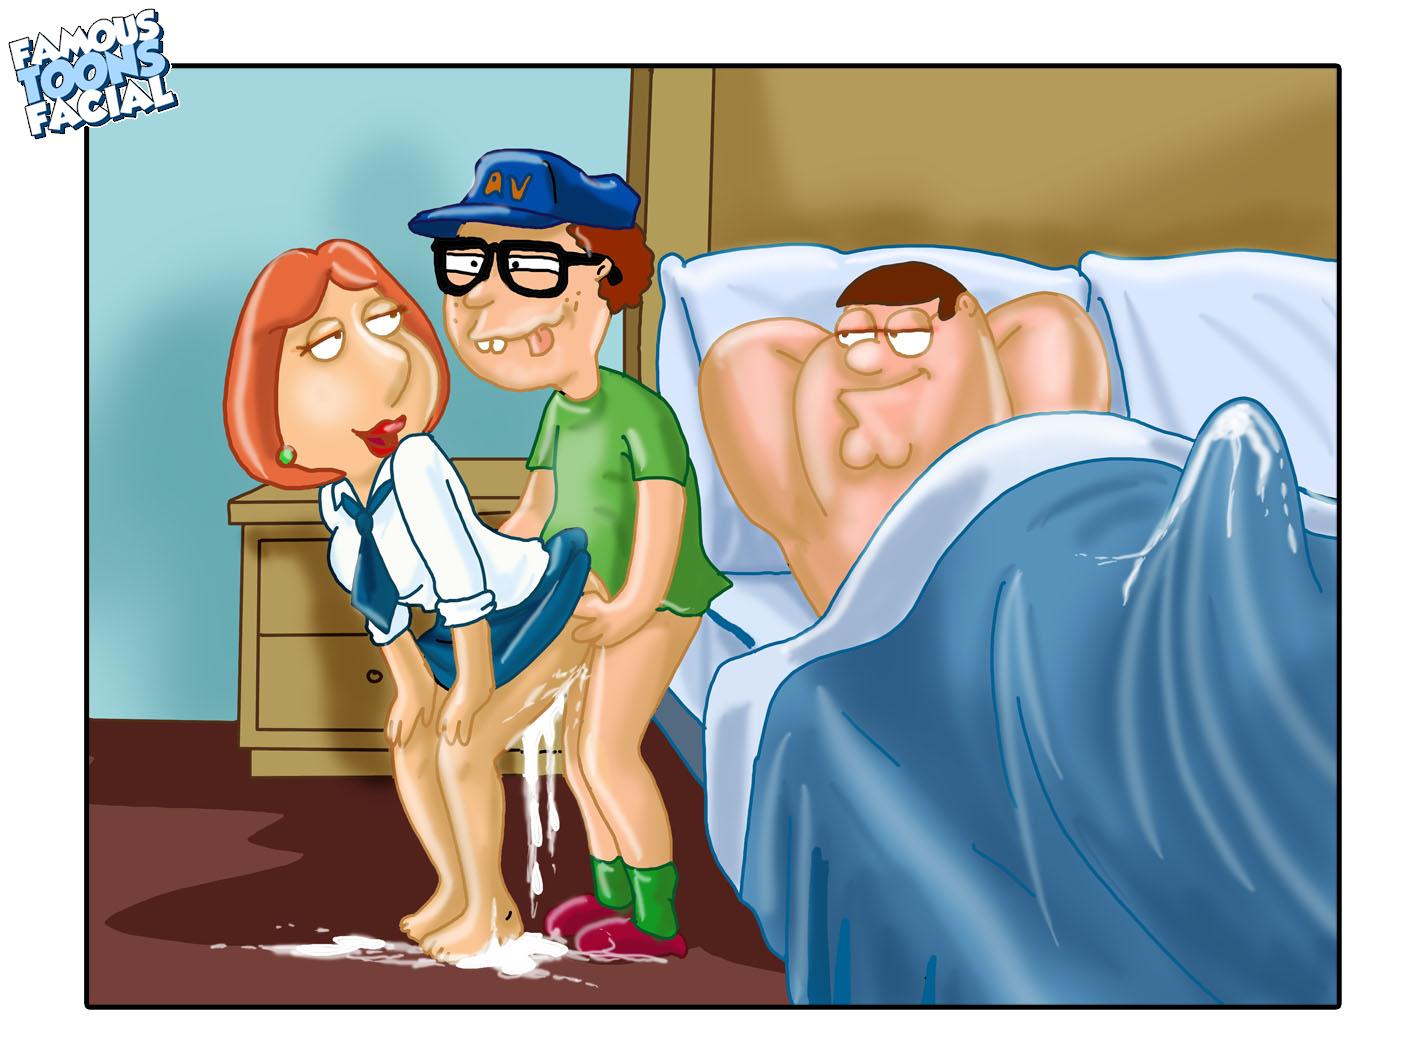 The Big ImageBoard (TBIB) - family guy famous-toons-facial lois griffin nei...